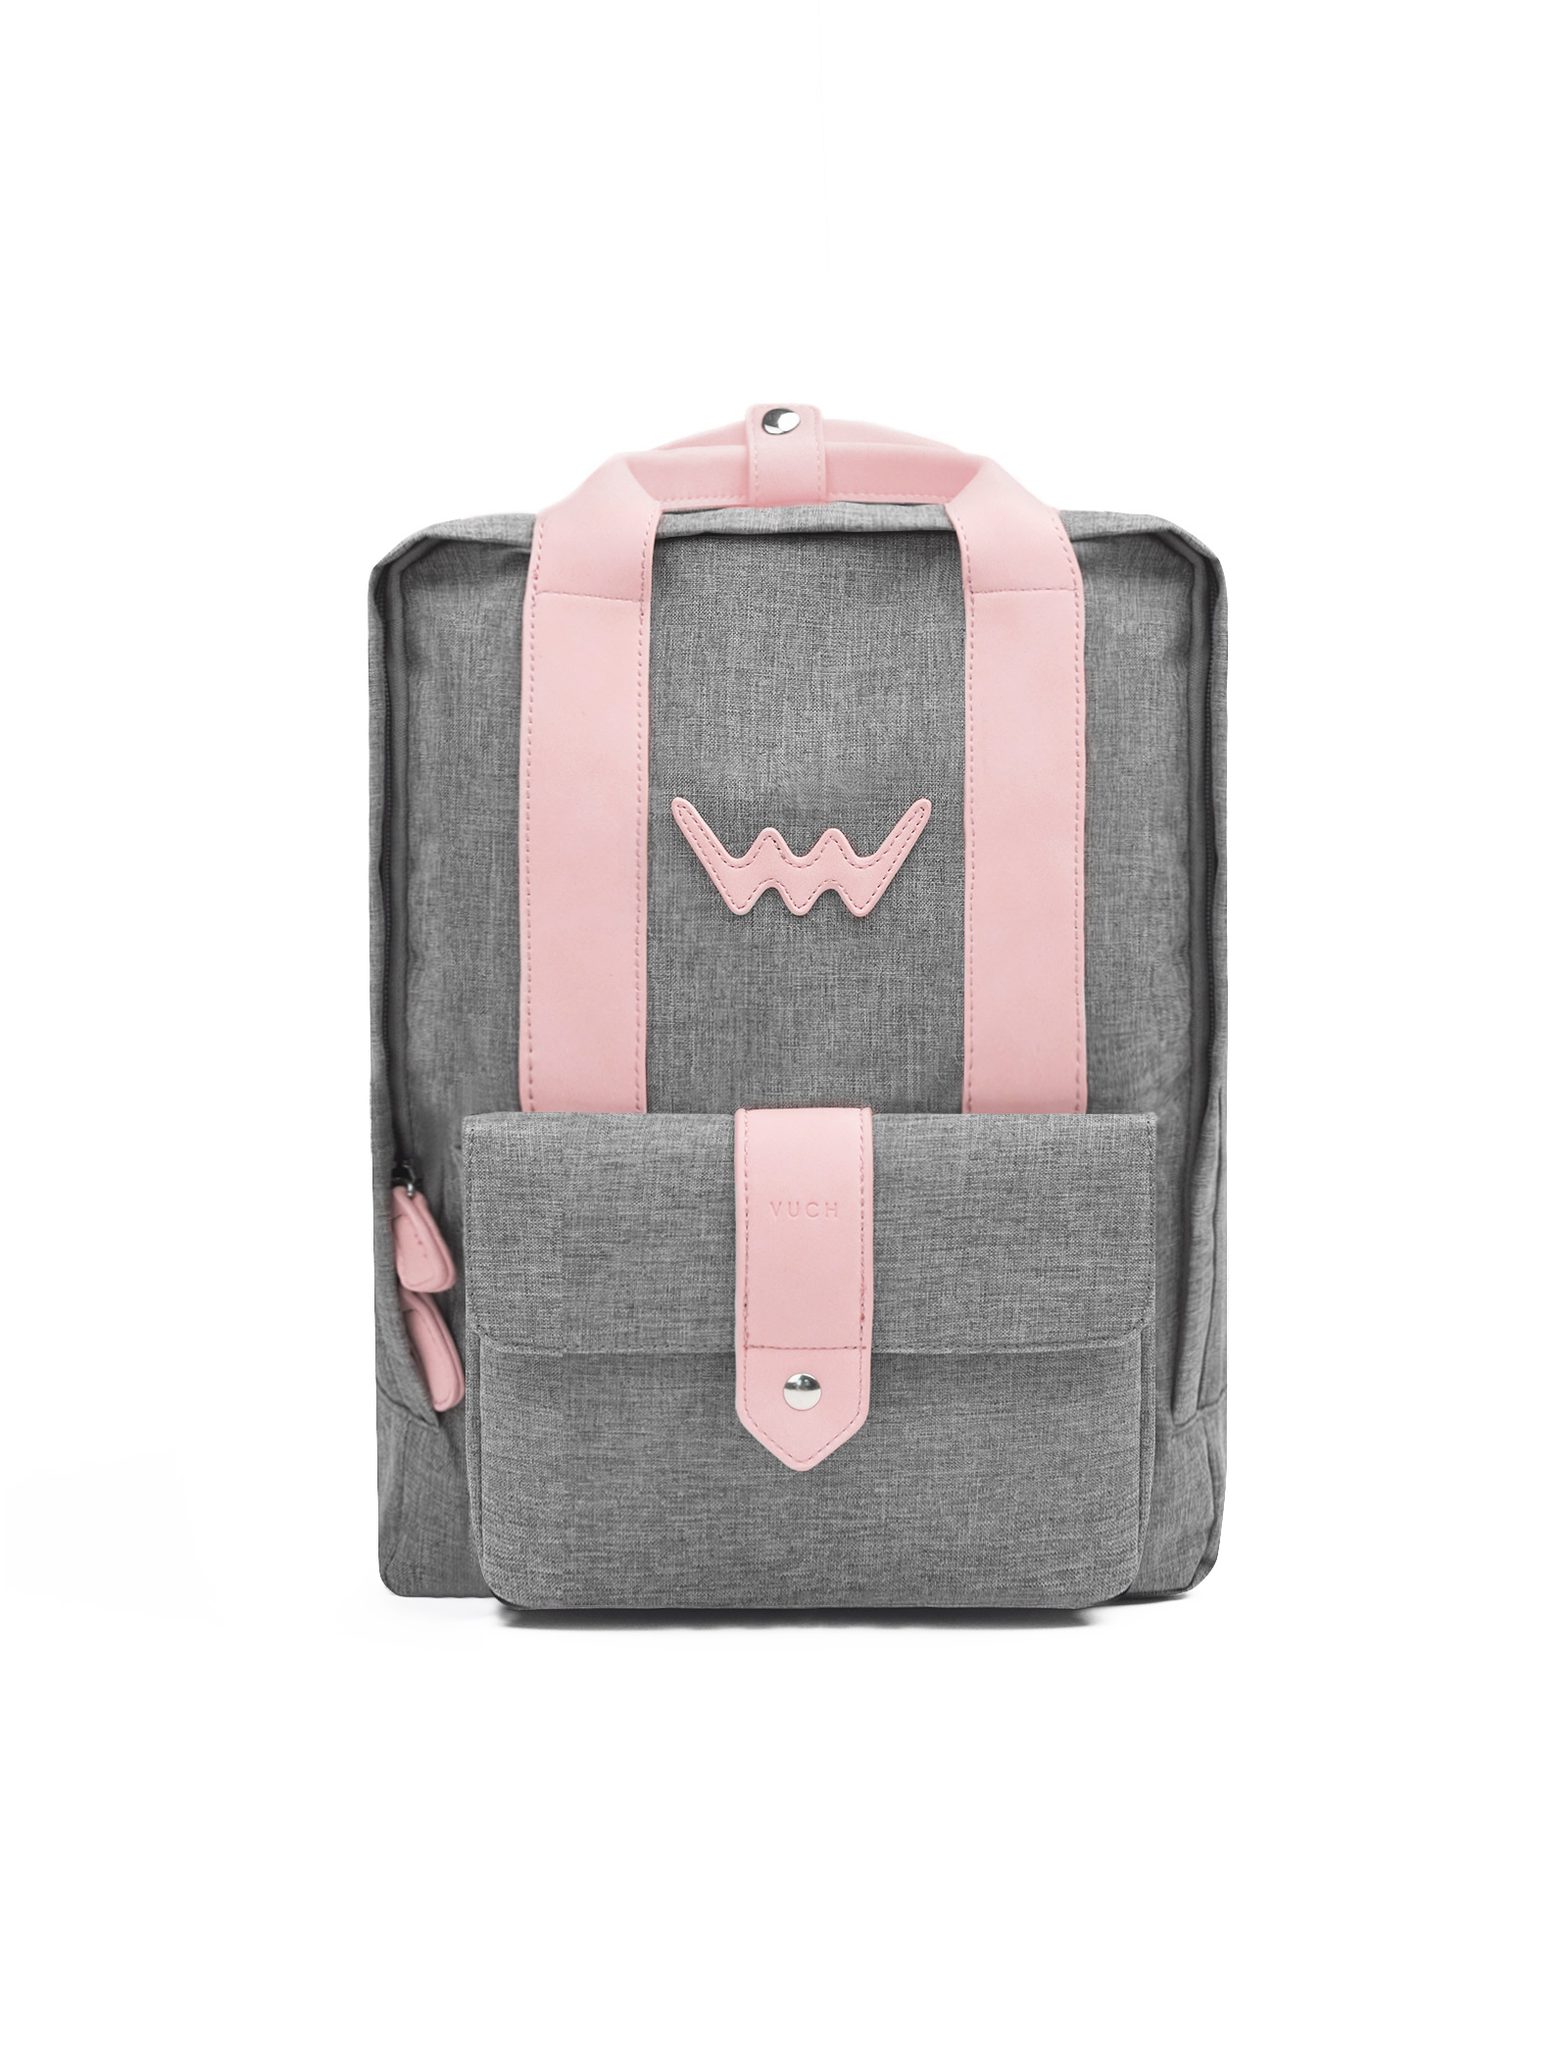 City backpack VUCH Tyrees Grey